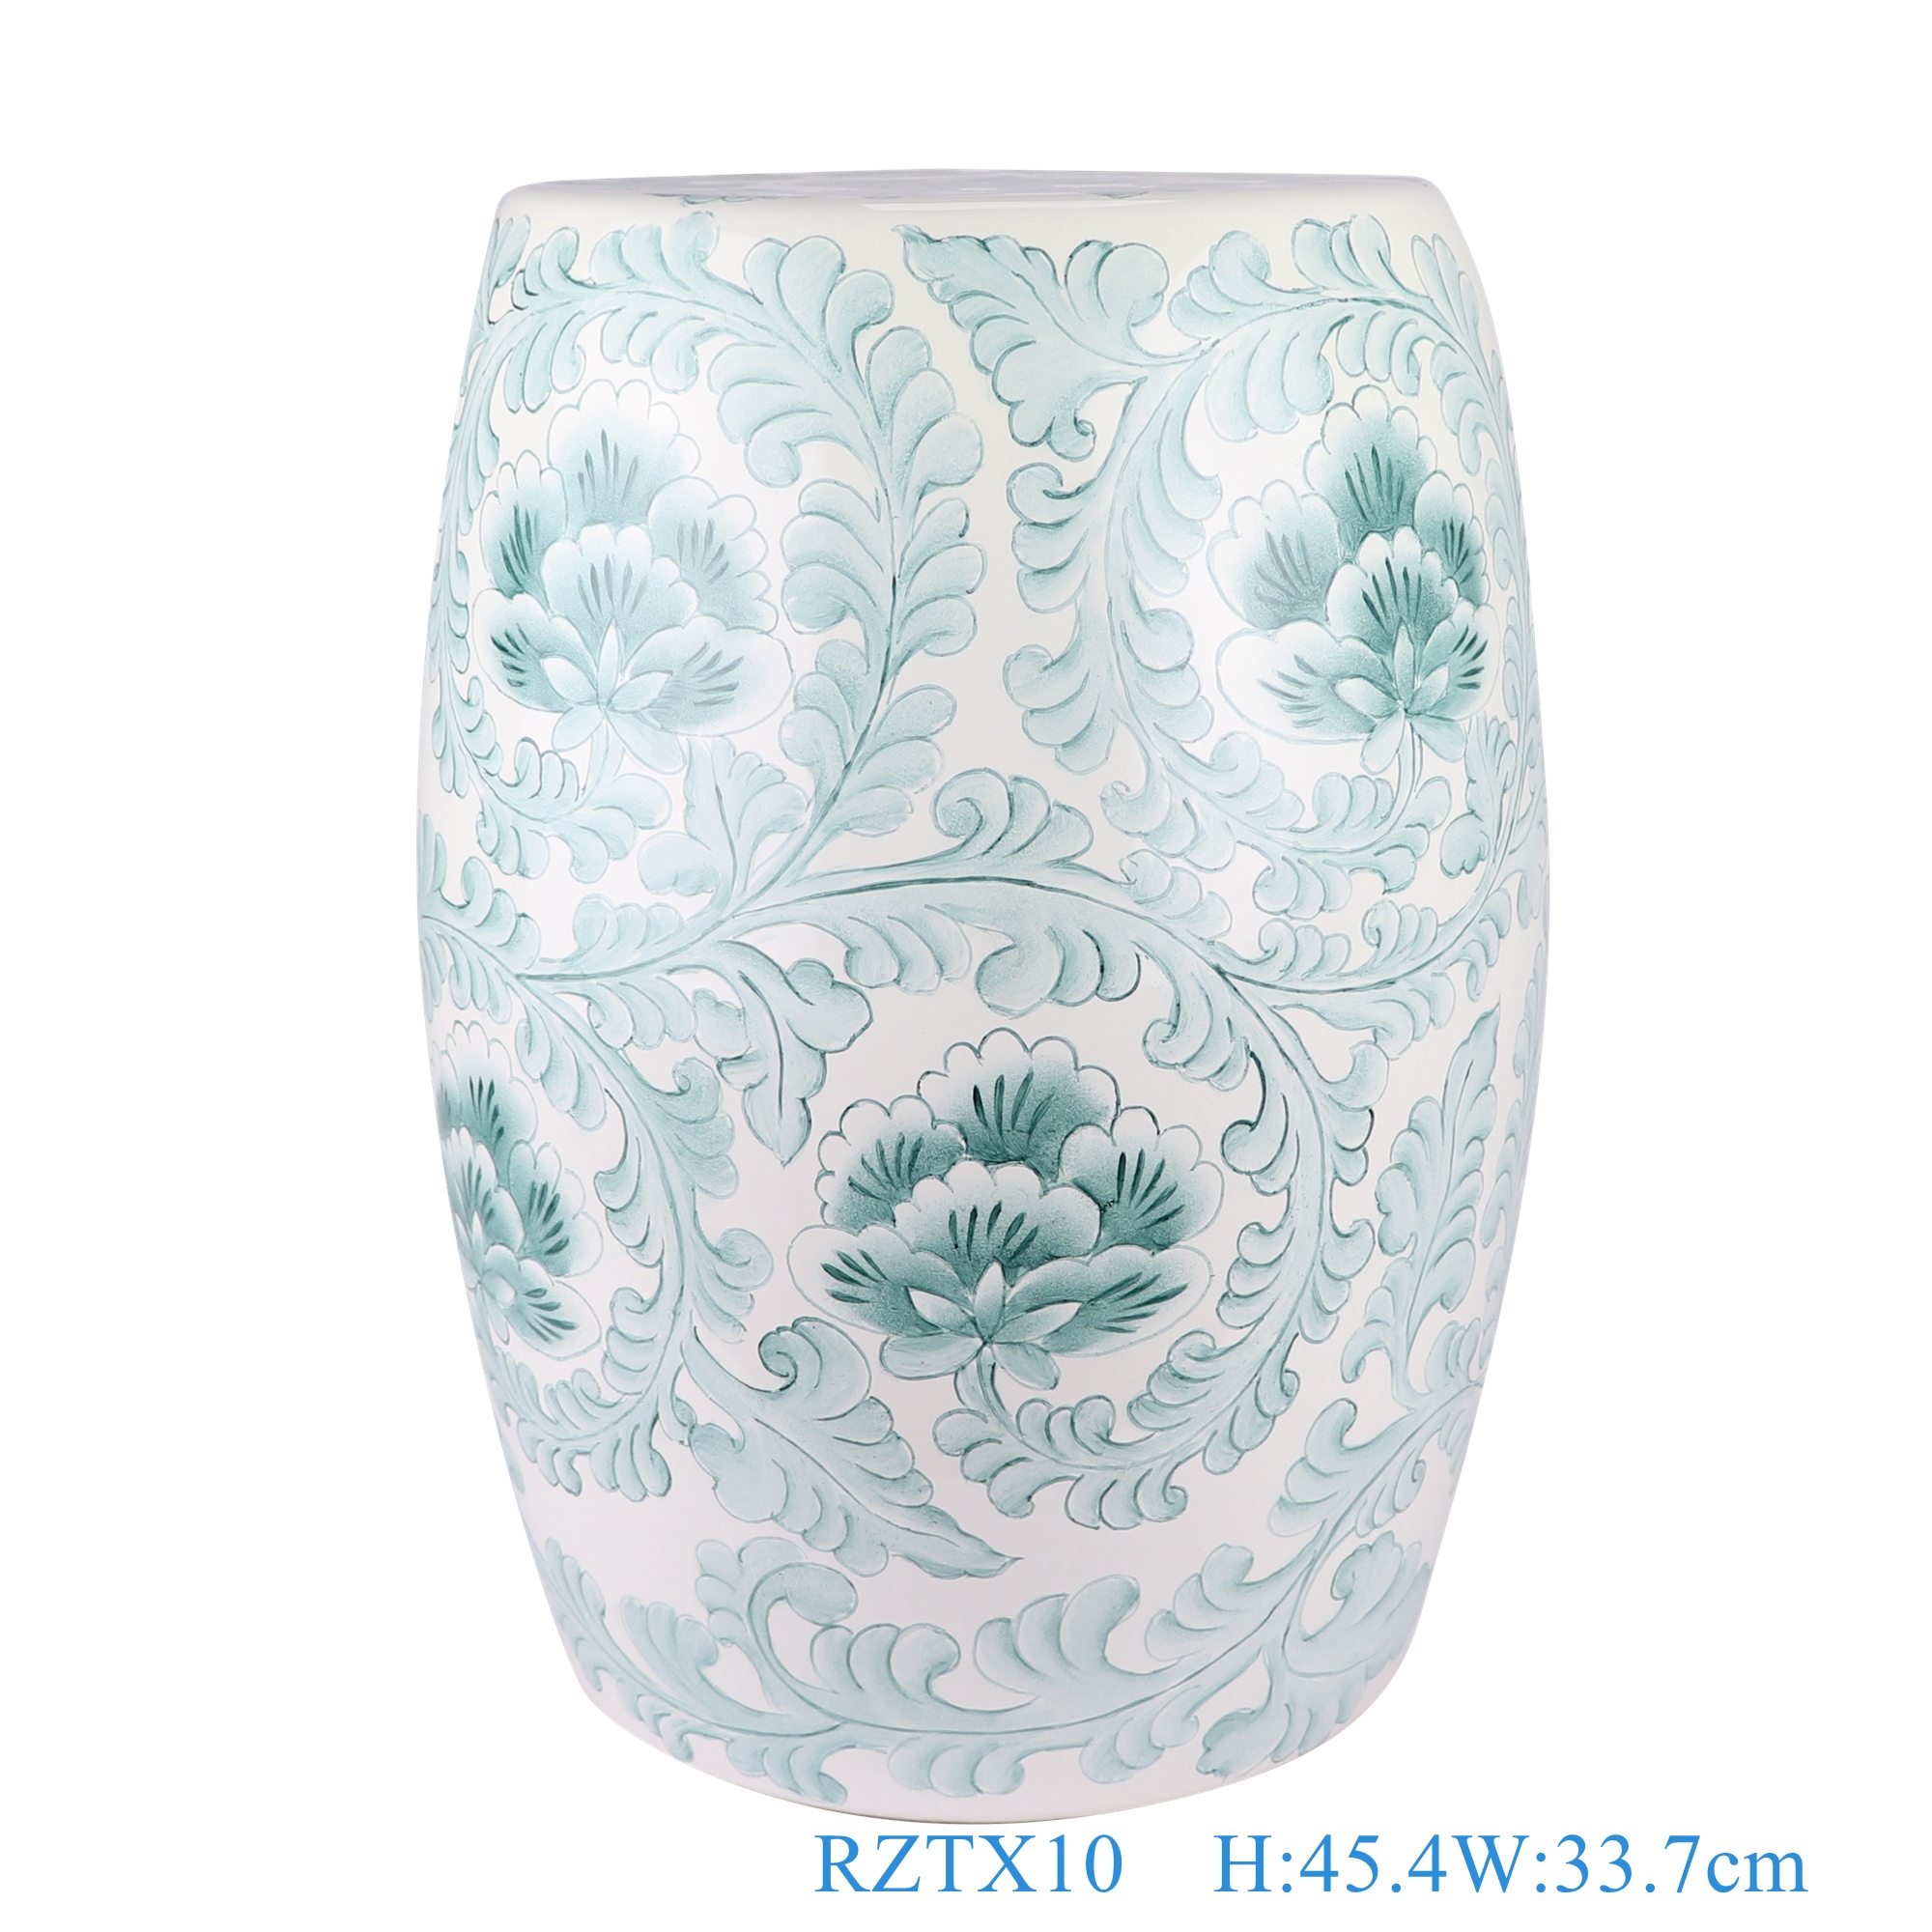 RZTX10 Porcelain Green Color Twisted Peony Flower Home Garden Office Ceramic Seat Drum Stool